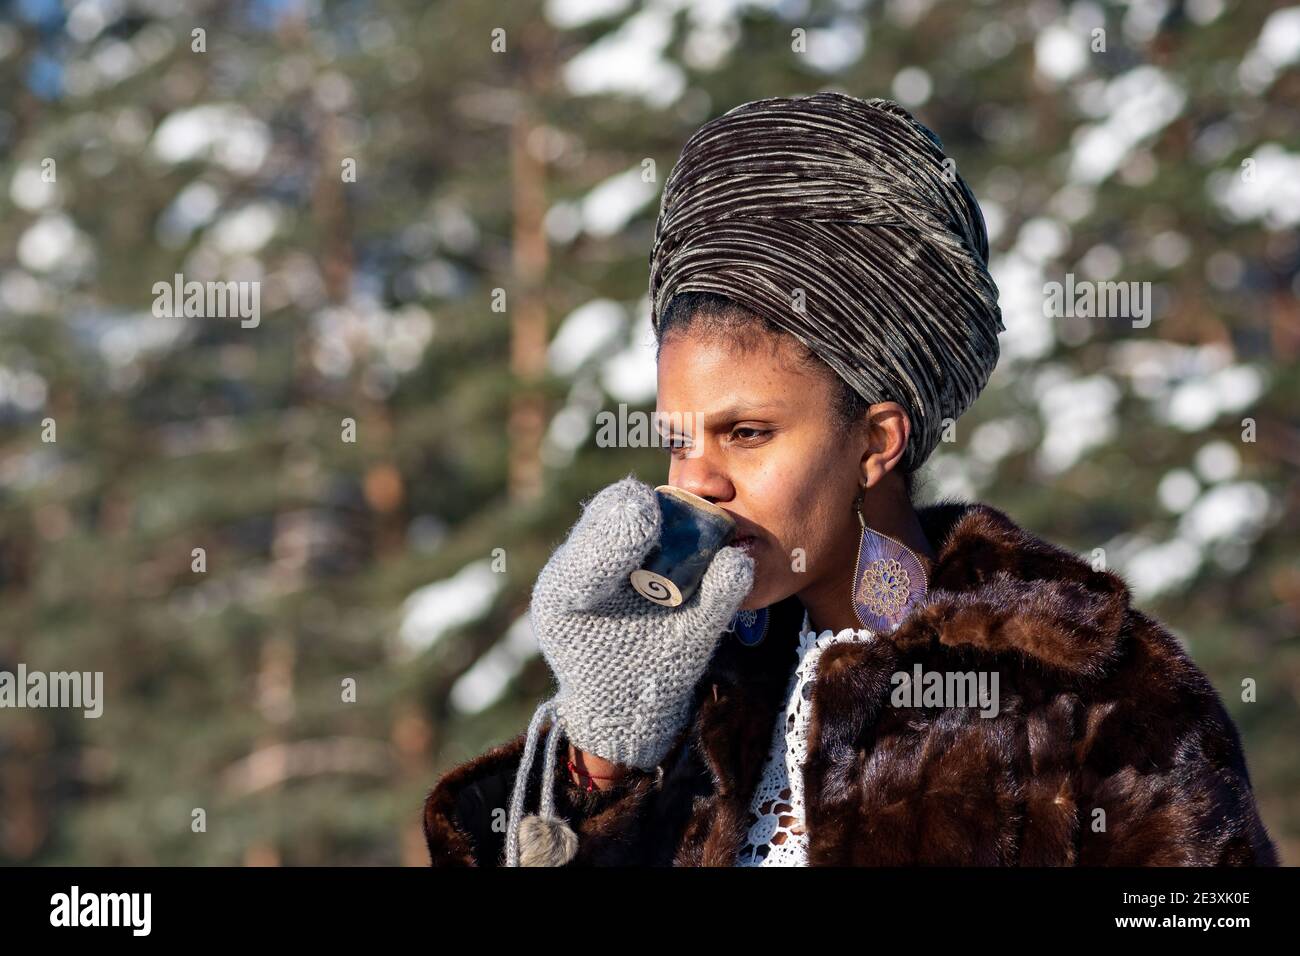 Vilnius, Lithuania - January 20 2021: Beautiful girl with fur coat drinking hot coffee or tea on the snow on a frozen lake in winter with forest trees Stock Photo